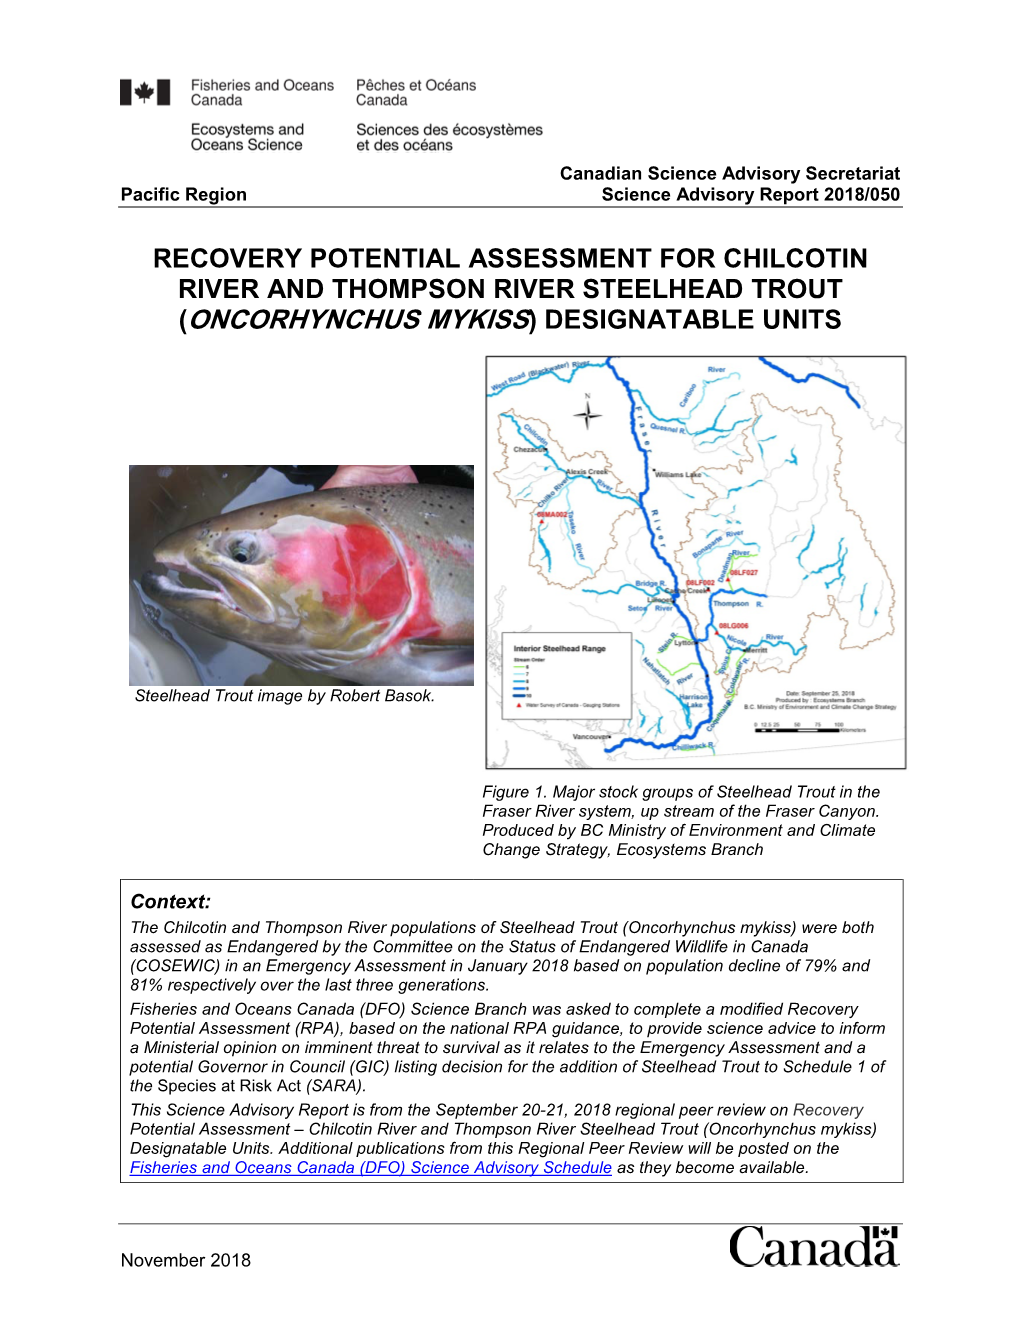 Recovery Potential Assessment for Chilcotin River and Thompson River Steelhead Trout (Oncorhynchus Mykiss) Designatable Units